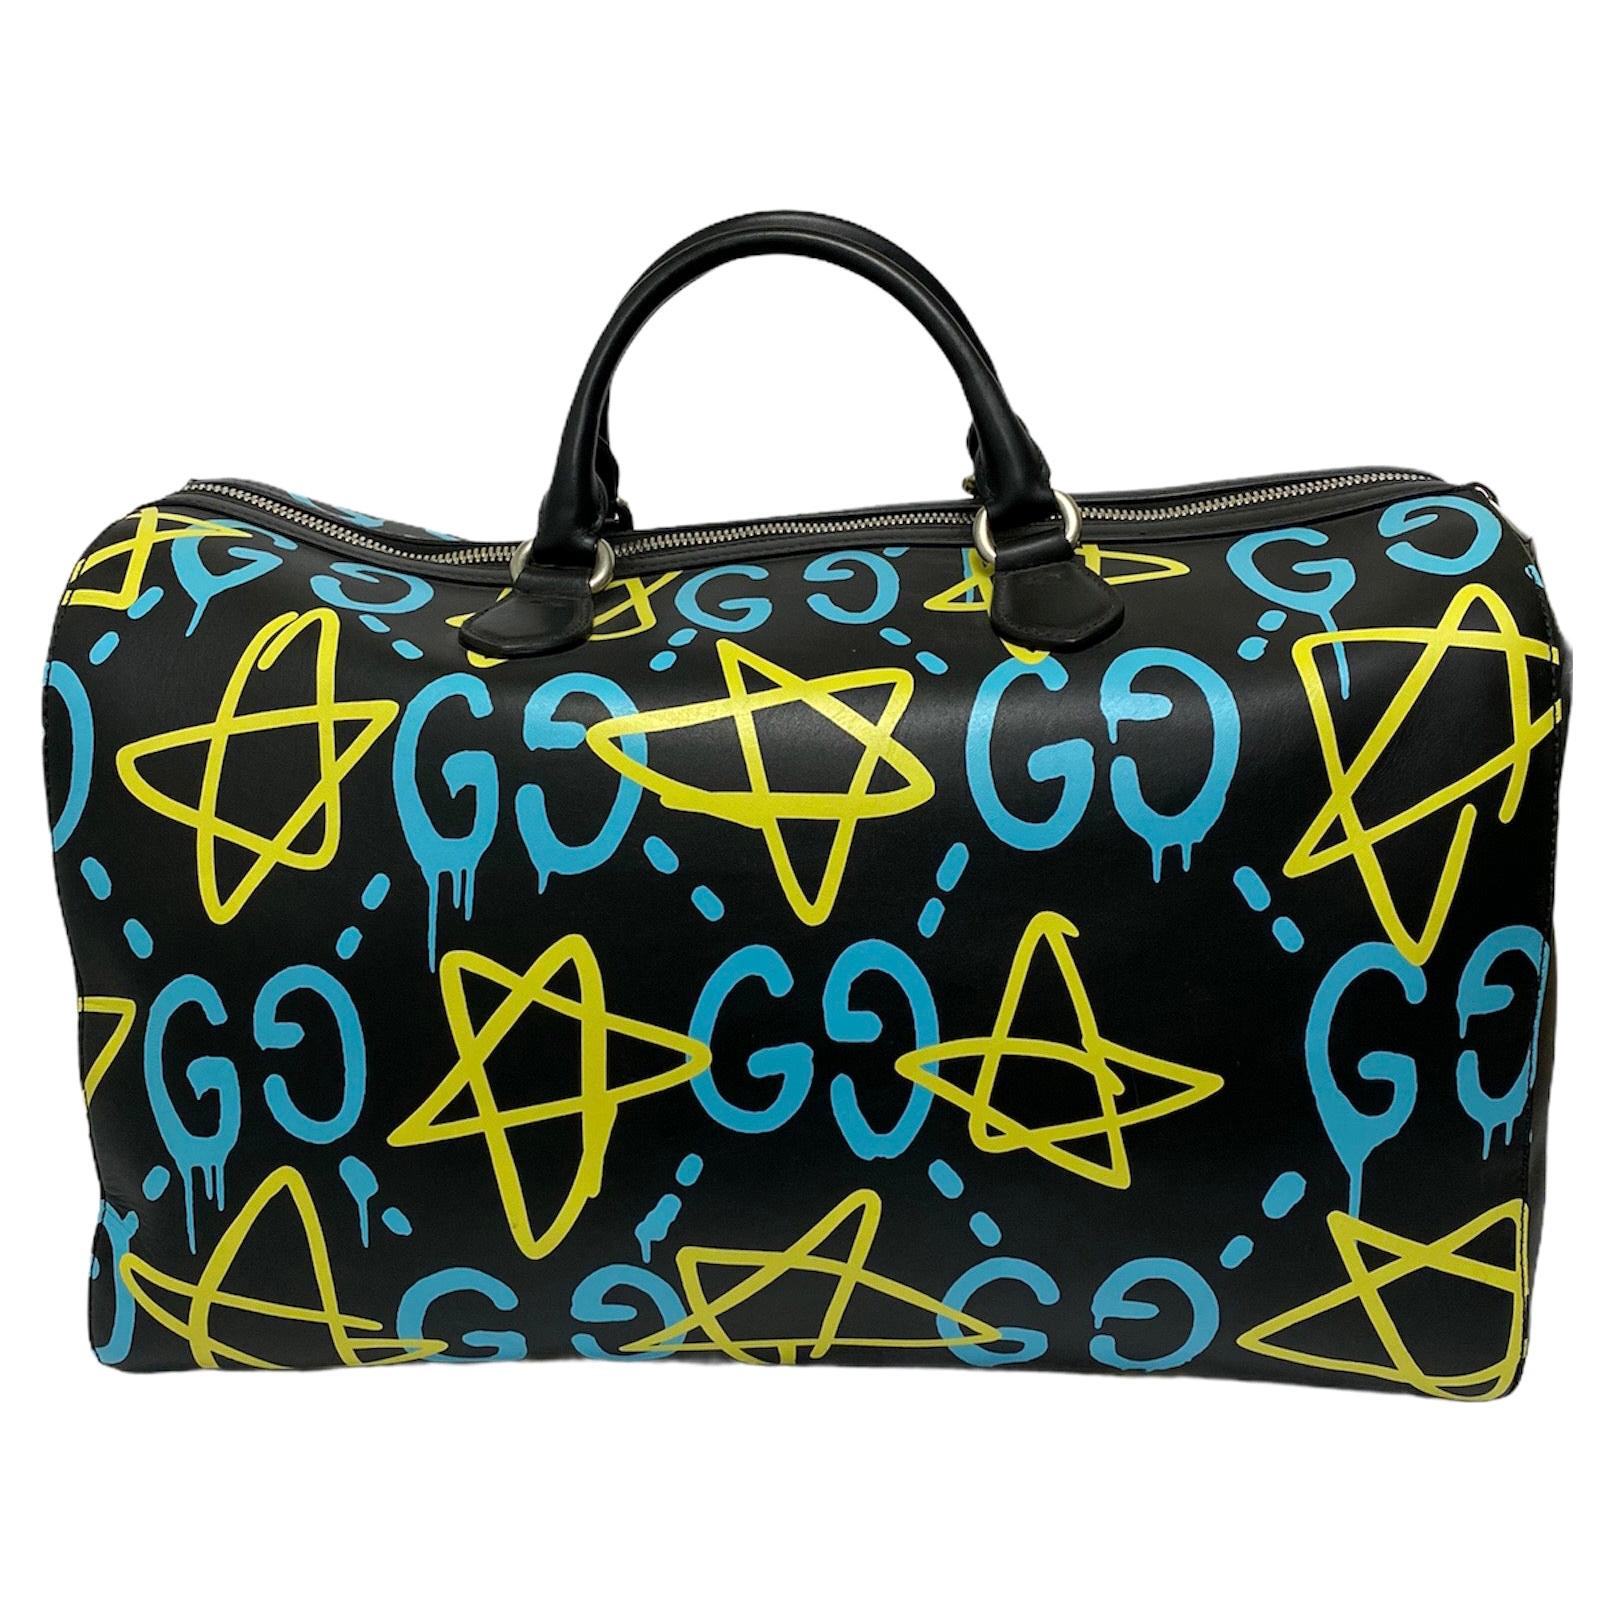 Gucci Ghost Bag in Black Leather with Yellow and Blue Decoration